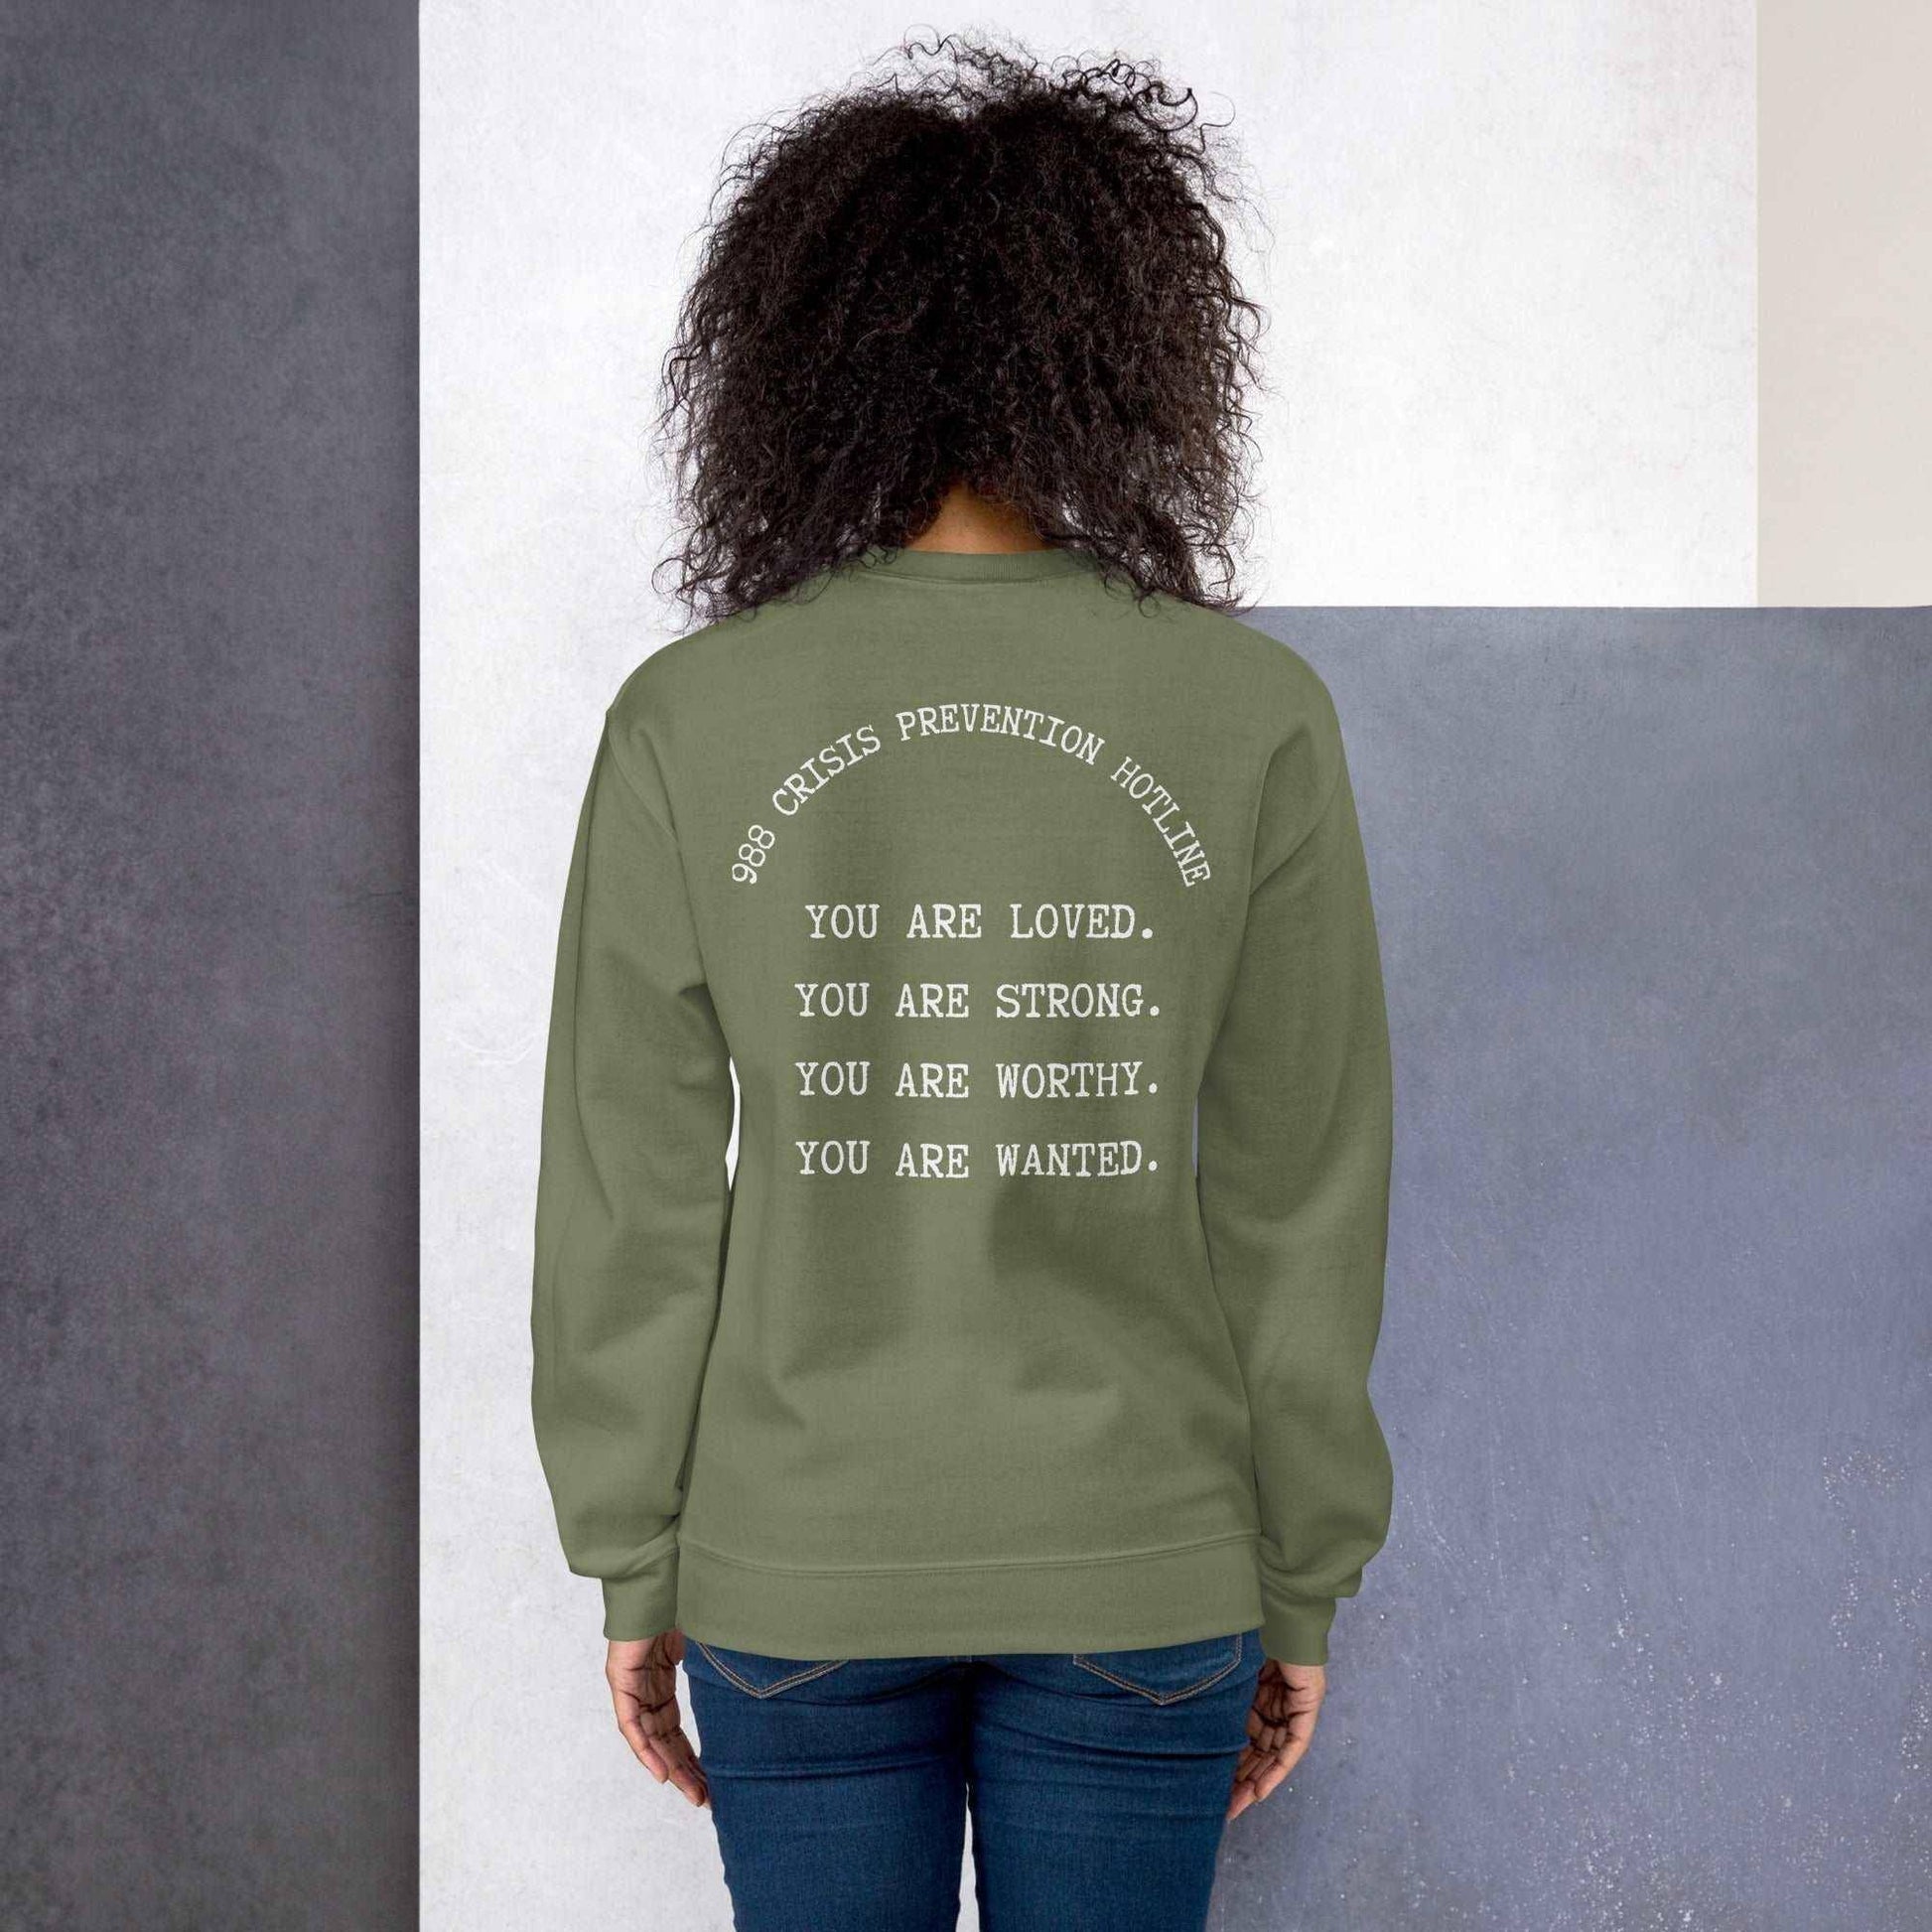 You Matter Embroidered Sweatshirt Military Green